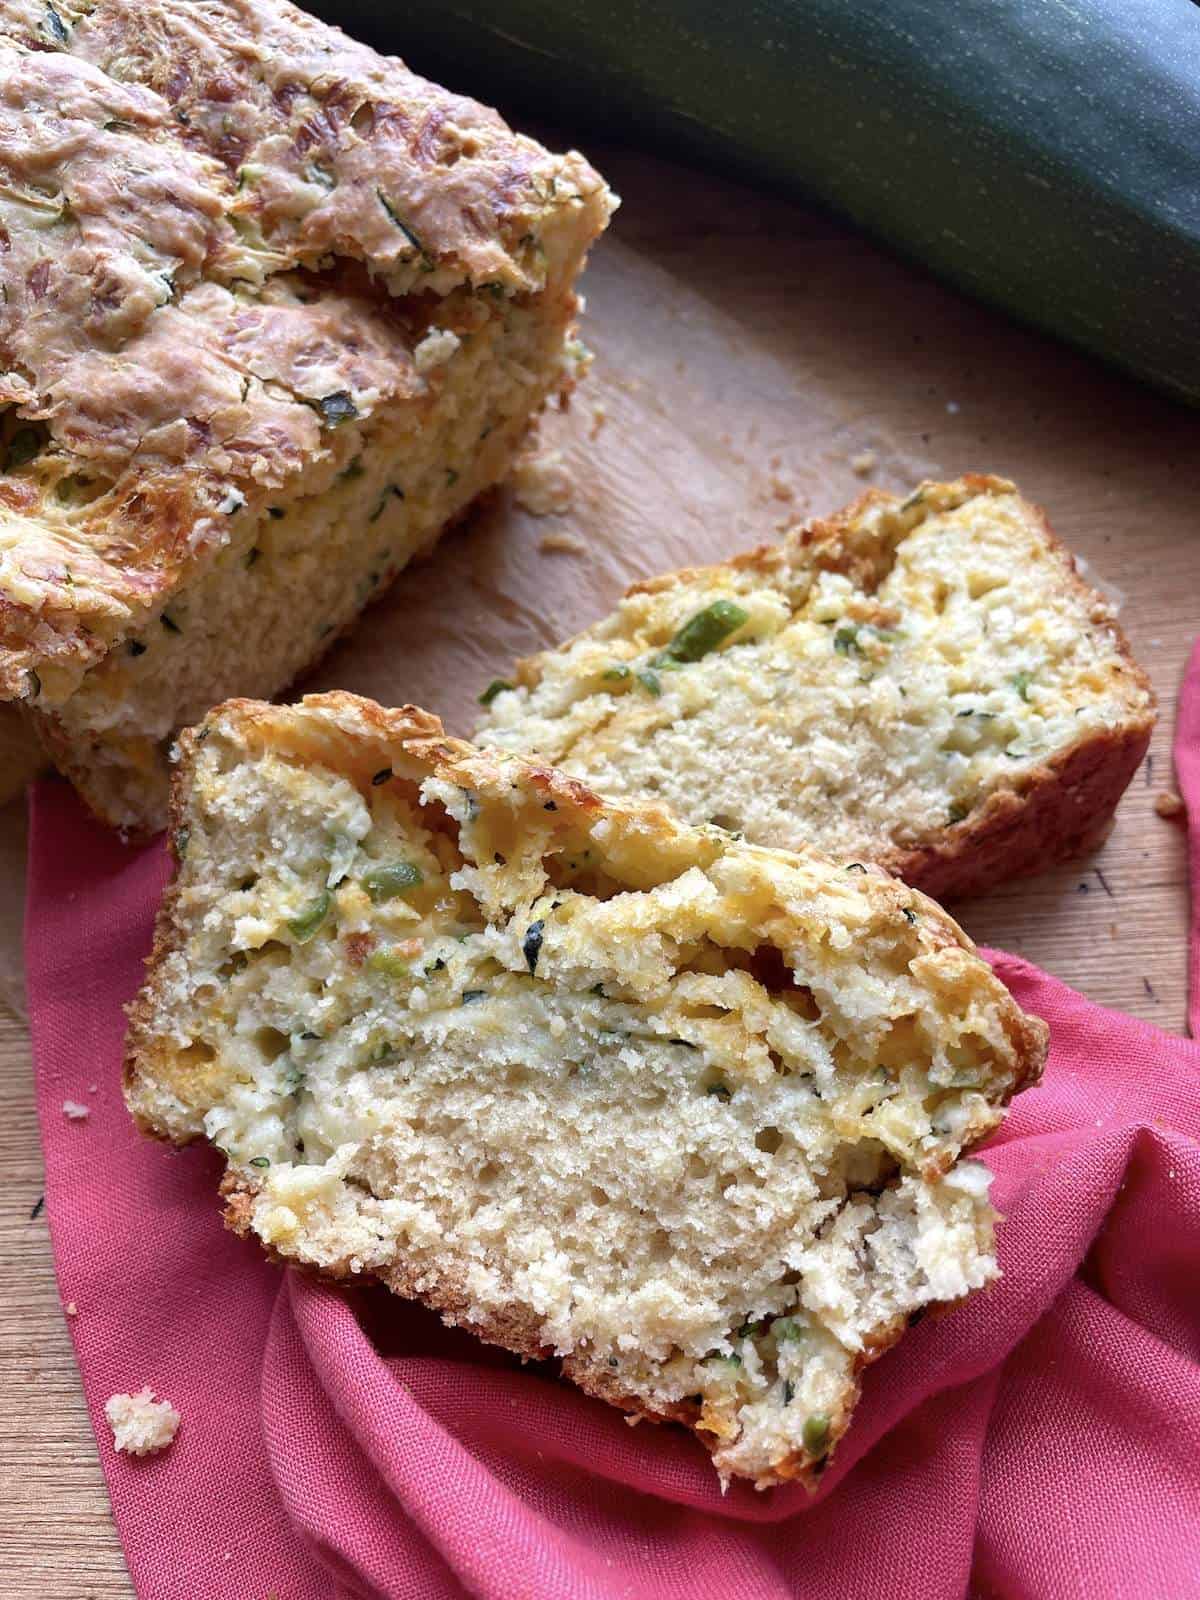 Slices of savory cheddar zucchini bread with jalapeños.